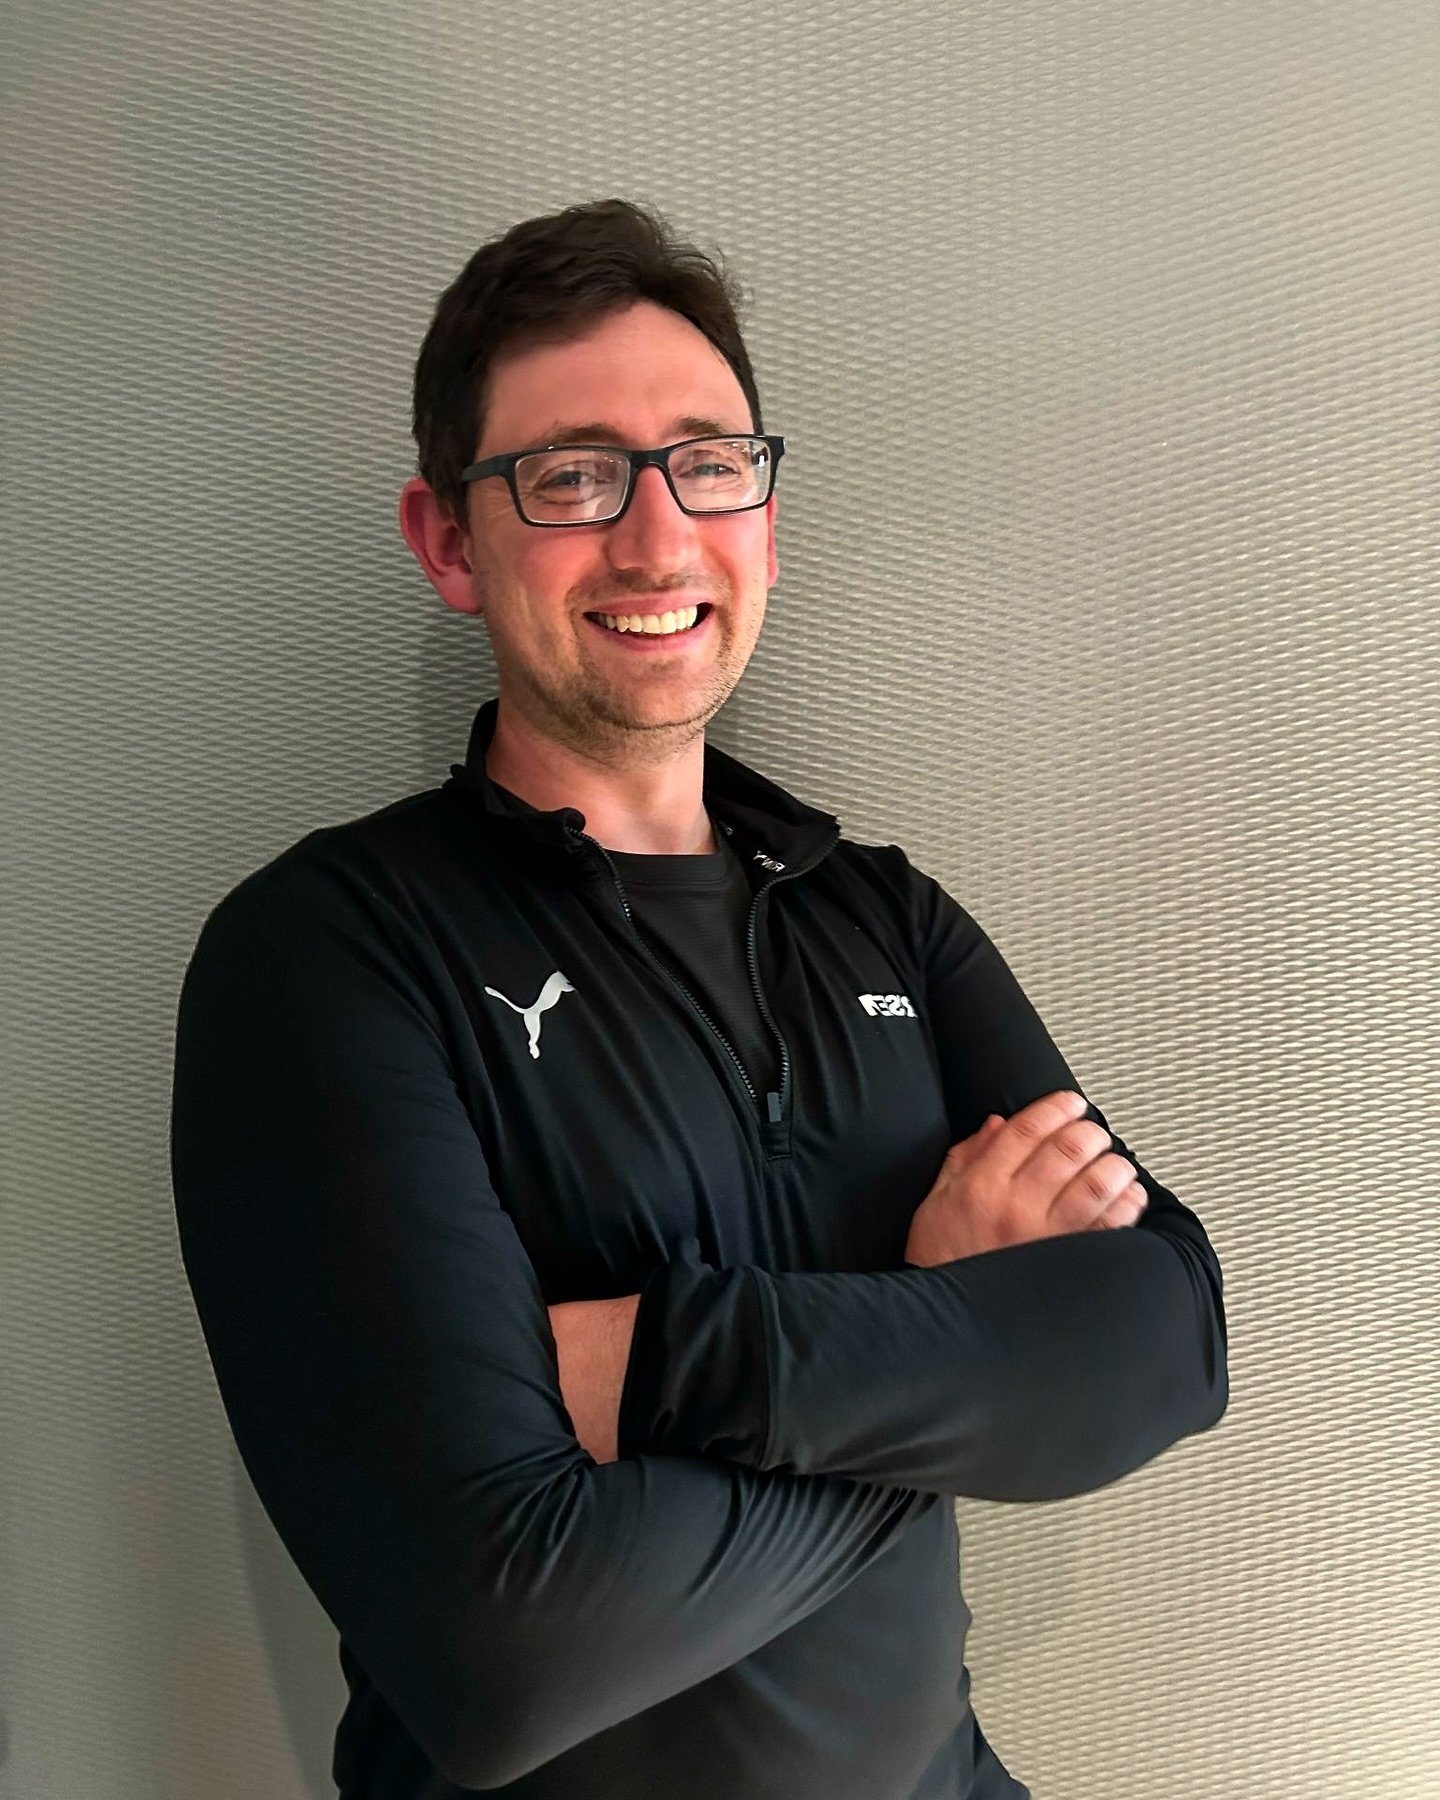 Meet our new R1SE Operations Manager&hellip; Thom Horne!!! 👋🏼 

Big congratulations to Thom on his recent promotion from Supervisor to Operations Manager! 🥳

If you have any queries regarding your memberships/spa bookings/operational issues Thom i